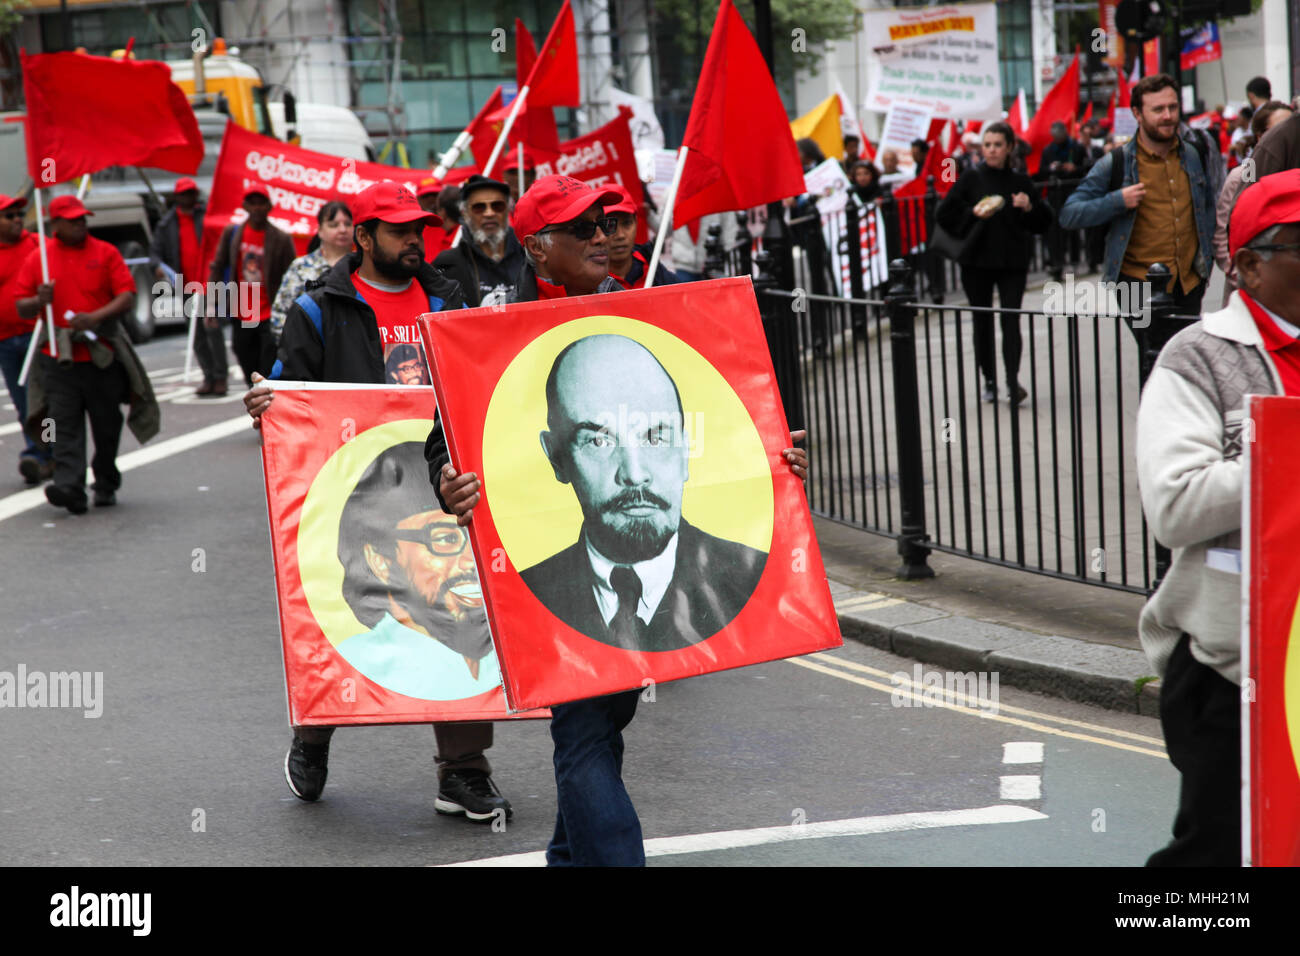 London, UK. 1st May 2018. Mayday Marcher carries Image of Lenin Credit: Alex Cavendish/Alamy Live News Stock Photo